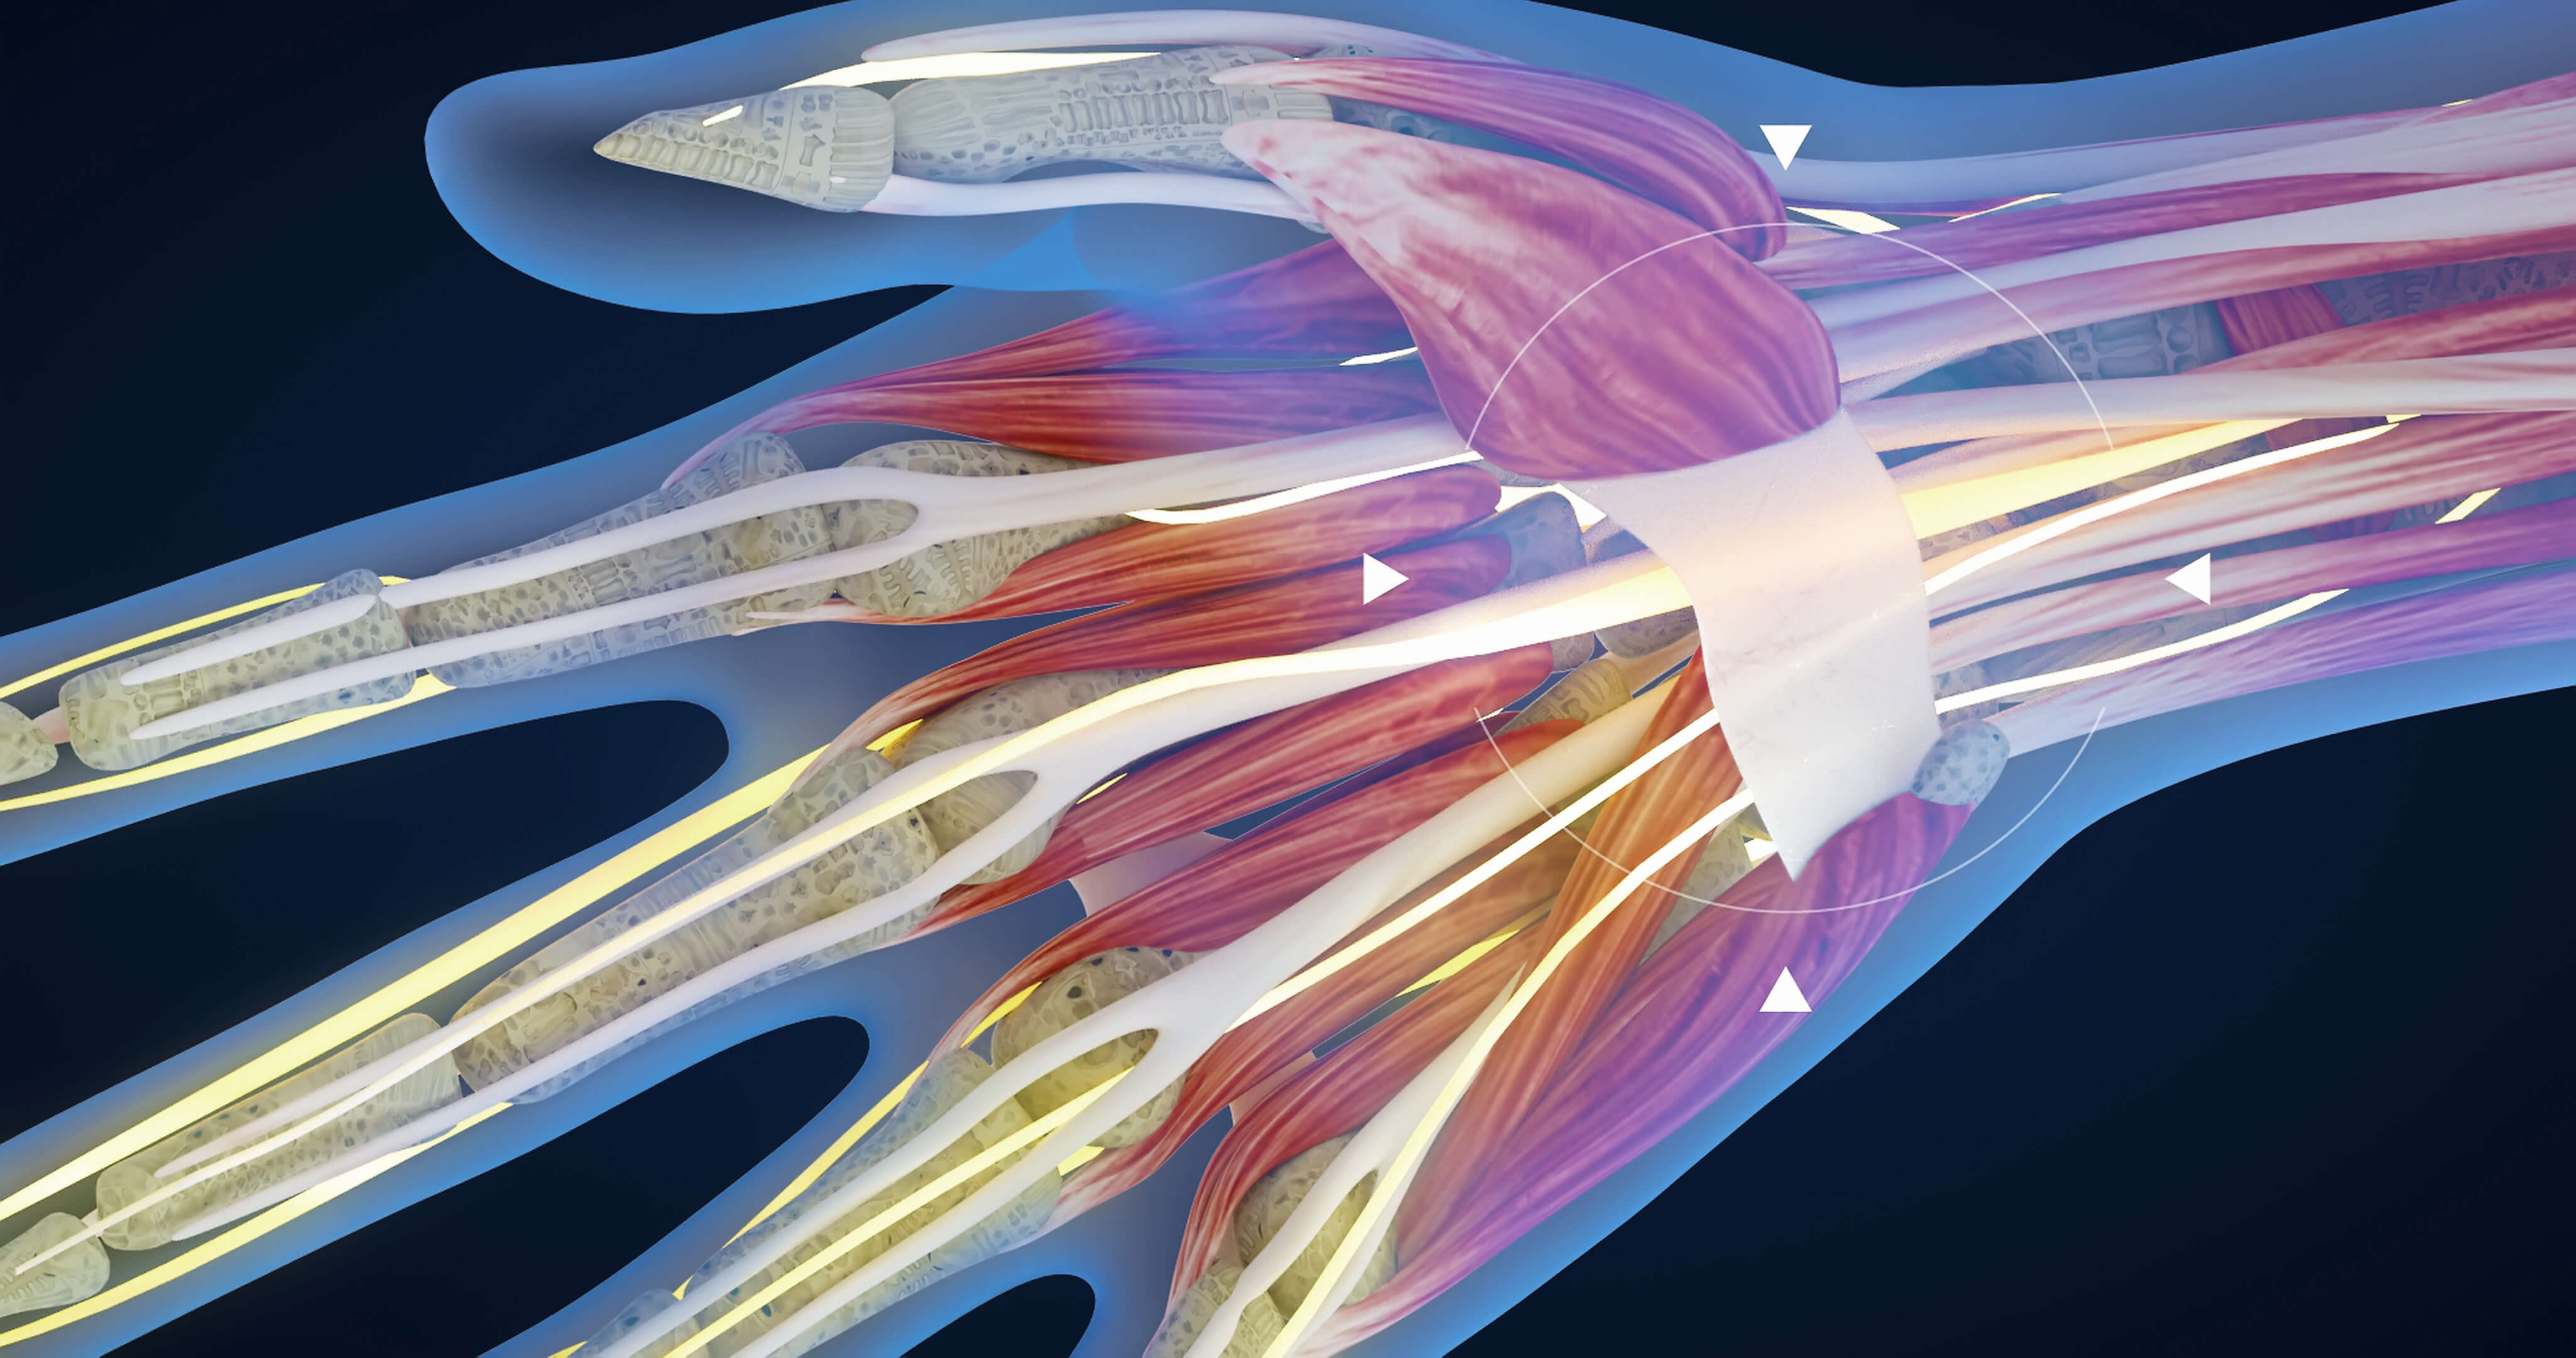 image of carpal tunnel syndrom on our chiropractic ceu page